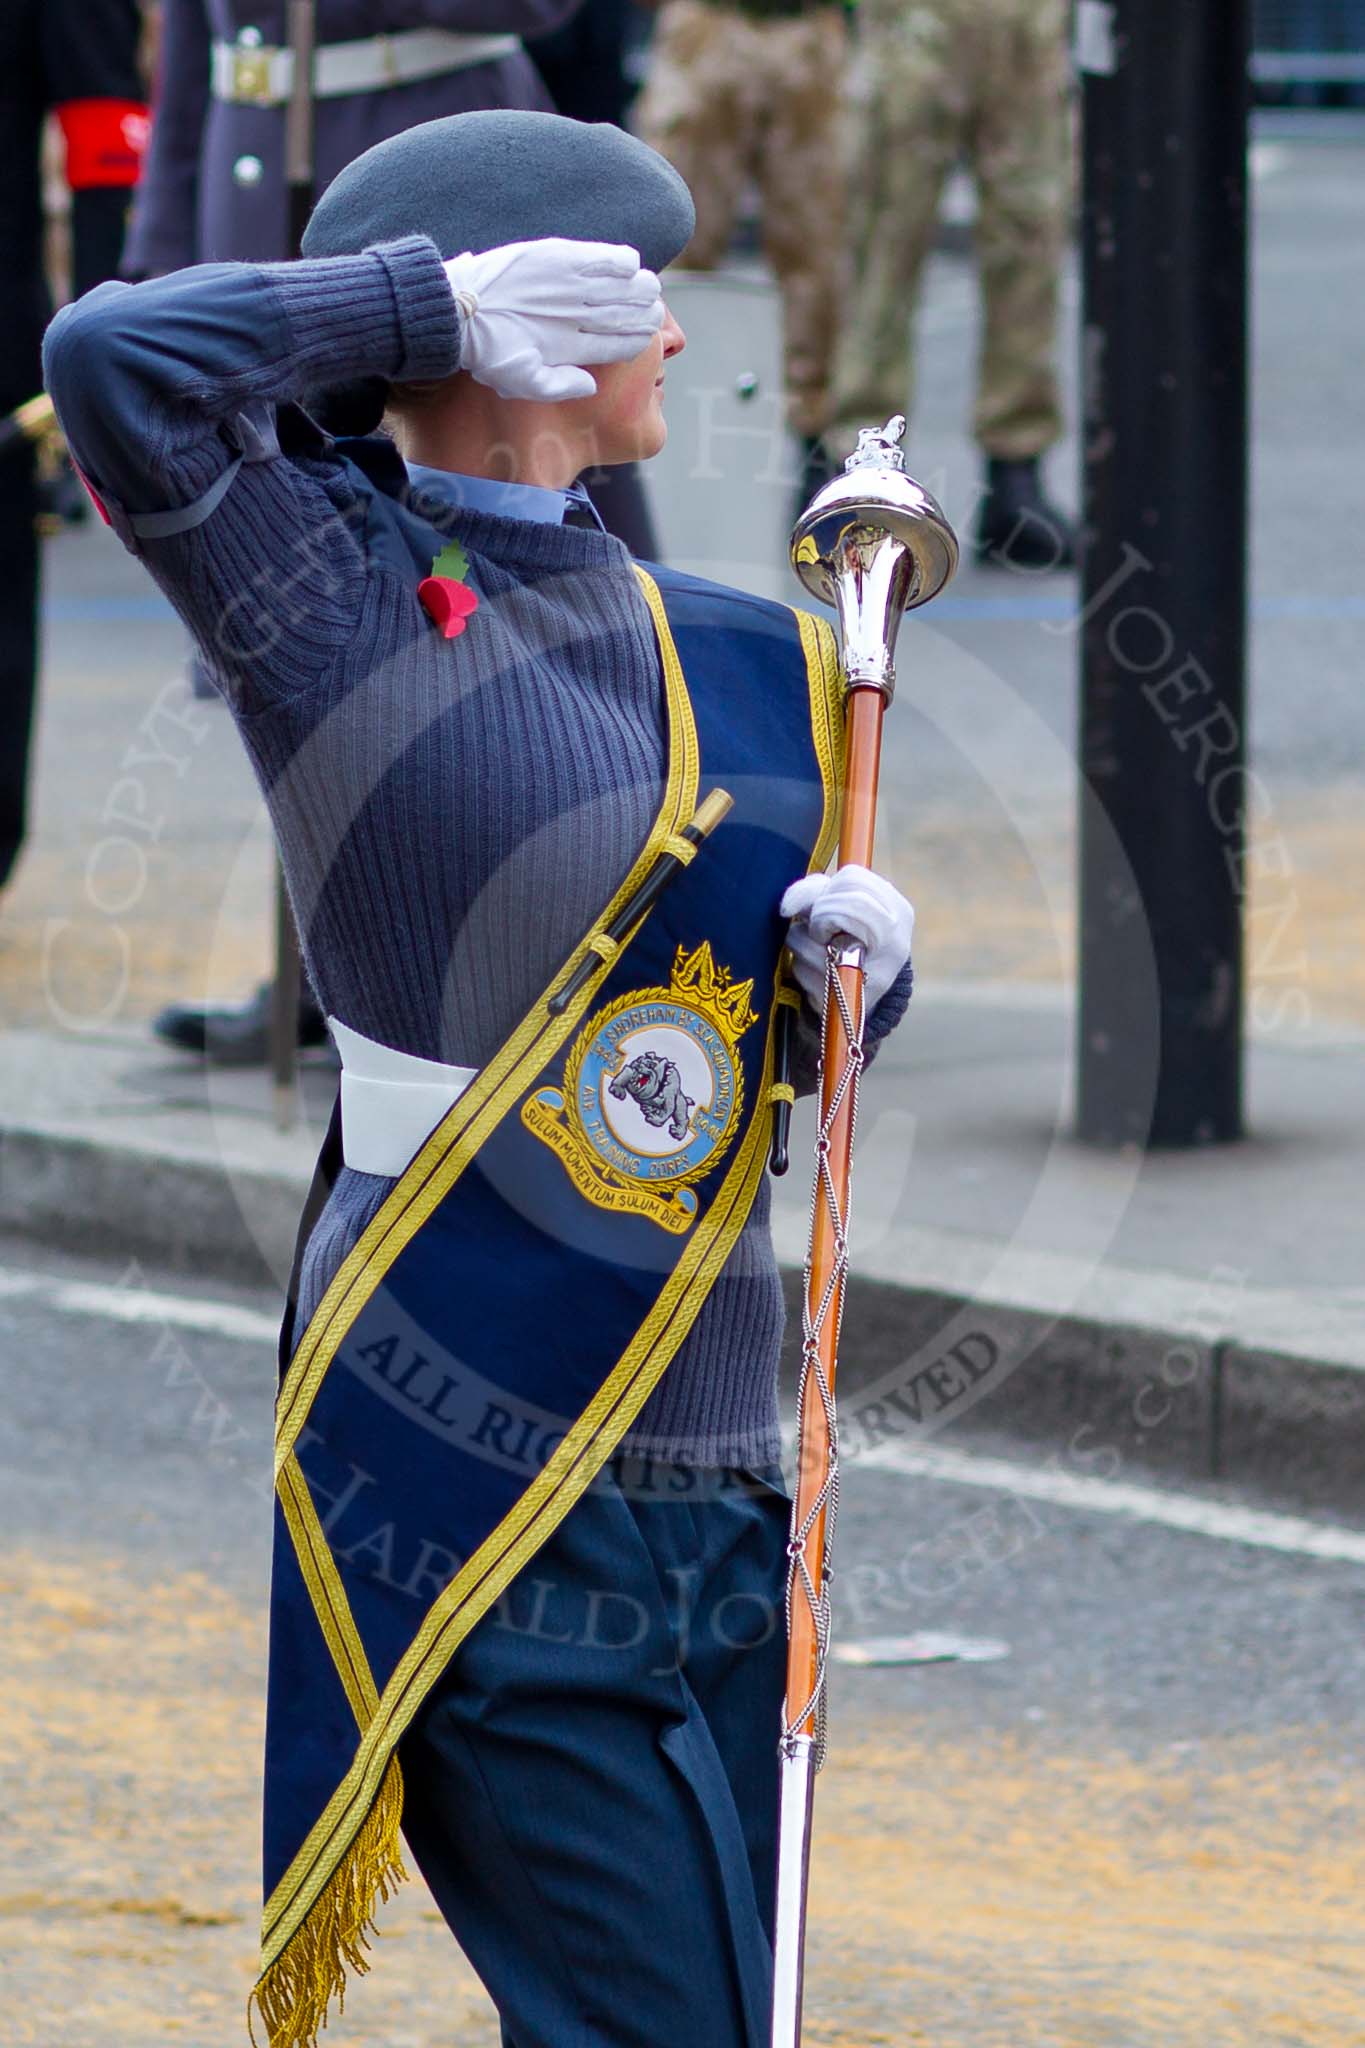 The Lord Mayor's Show 2011: The Band of 176 (Hove) Squadron Air Training Corps, here the Drum Major..
Opposite Mansion House, City of London,
London,
-,
United Kingdom,
on 12 November 2011 at 11:17, image #199